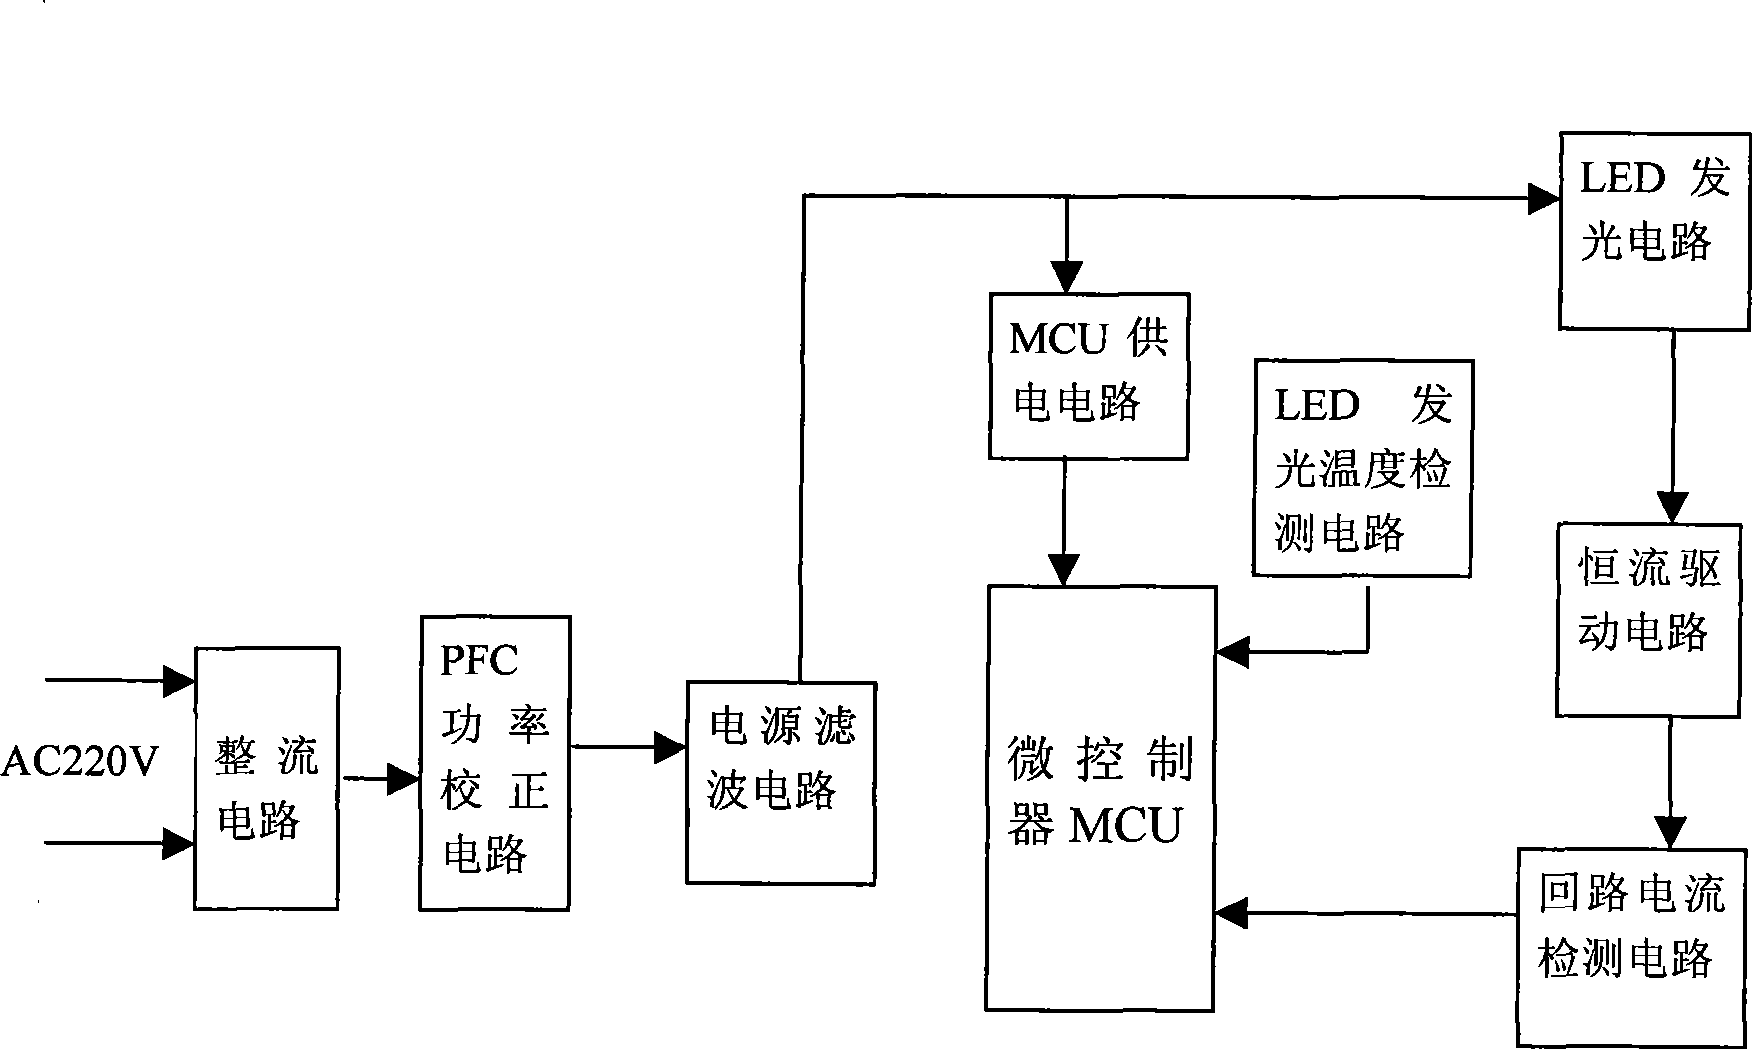 Alternating current large-power tricolor LED lighting energy-saving lamp of microcomputer